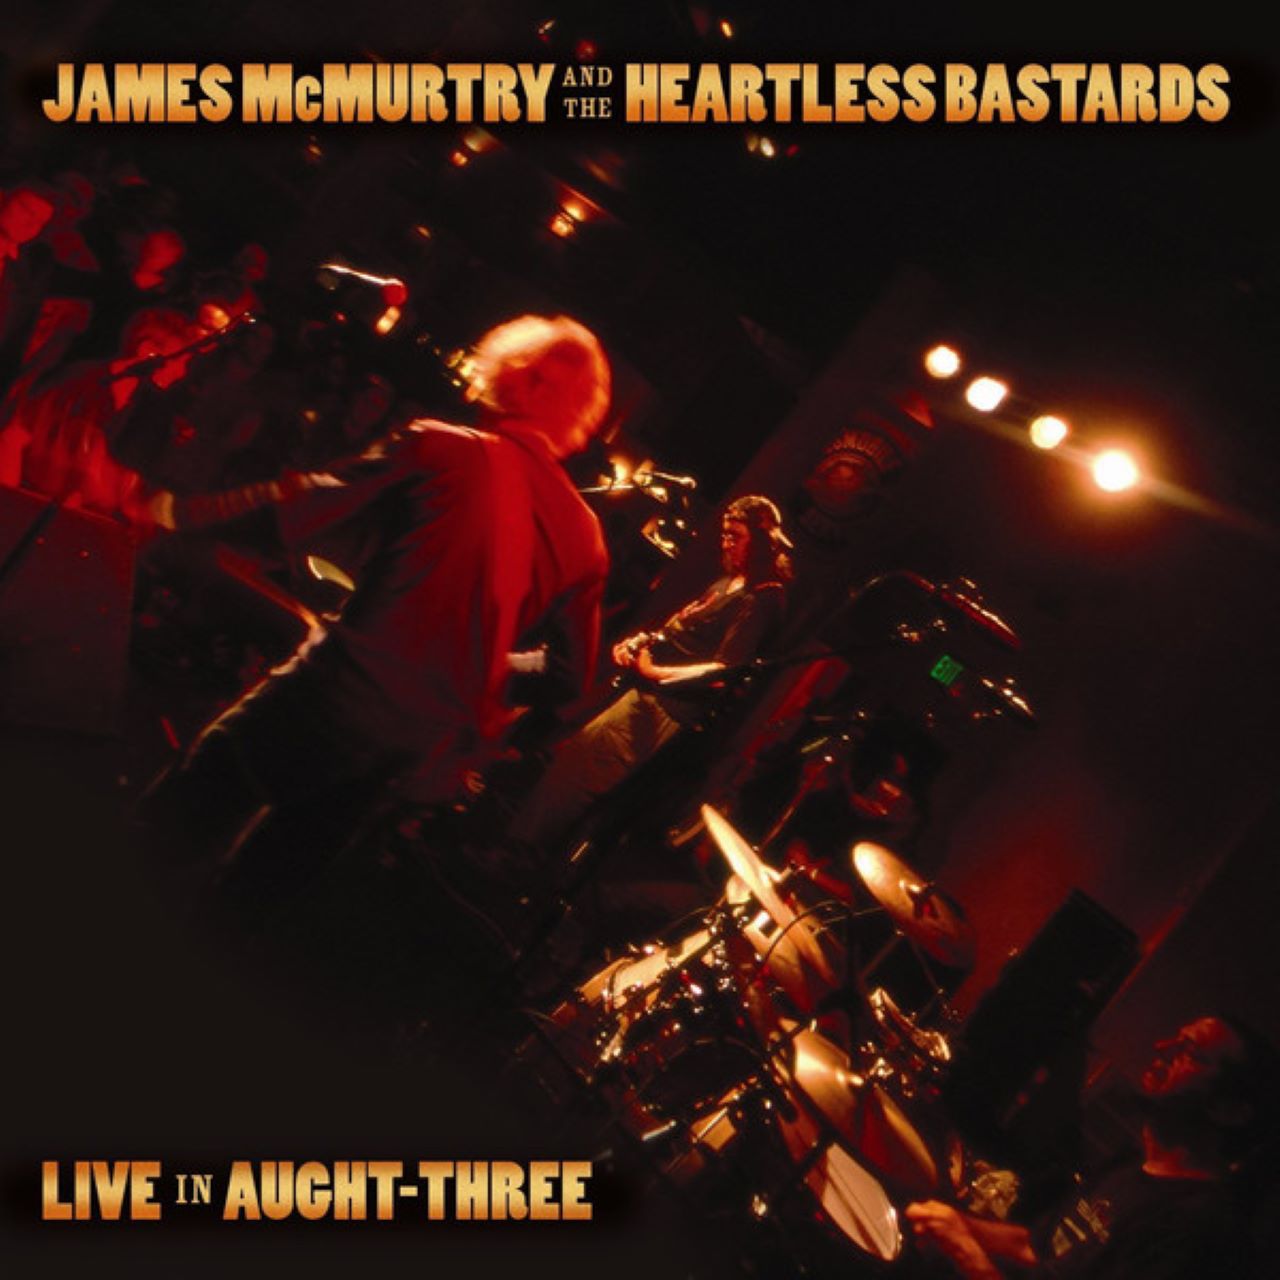 James McMurtry & The Heartless Bastards - Live In Aught-Three copertina disco